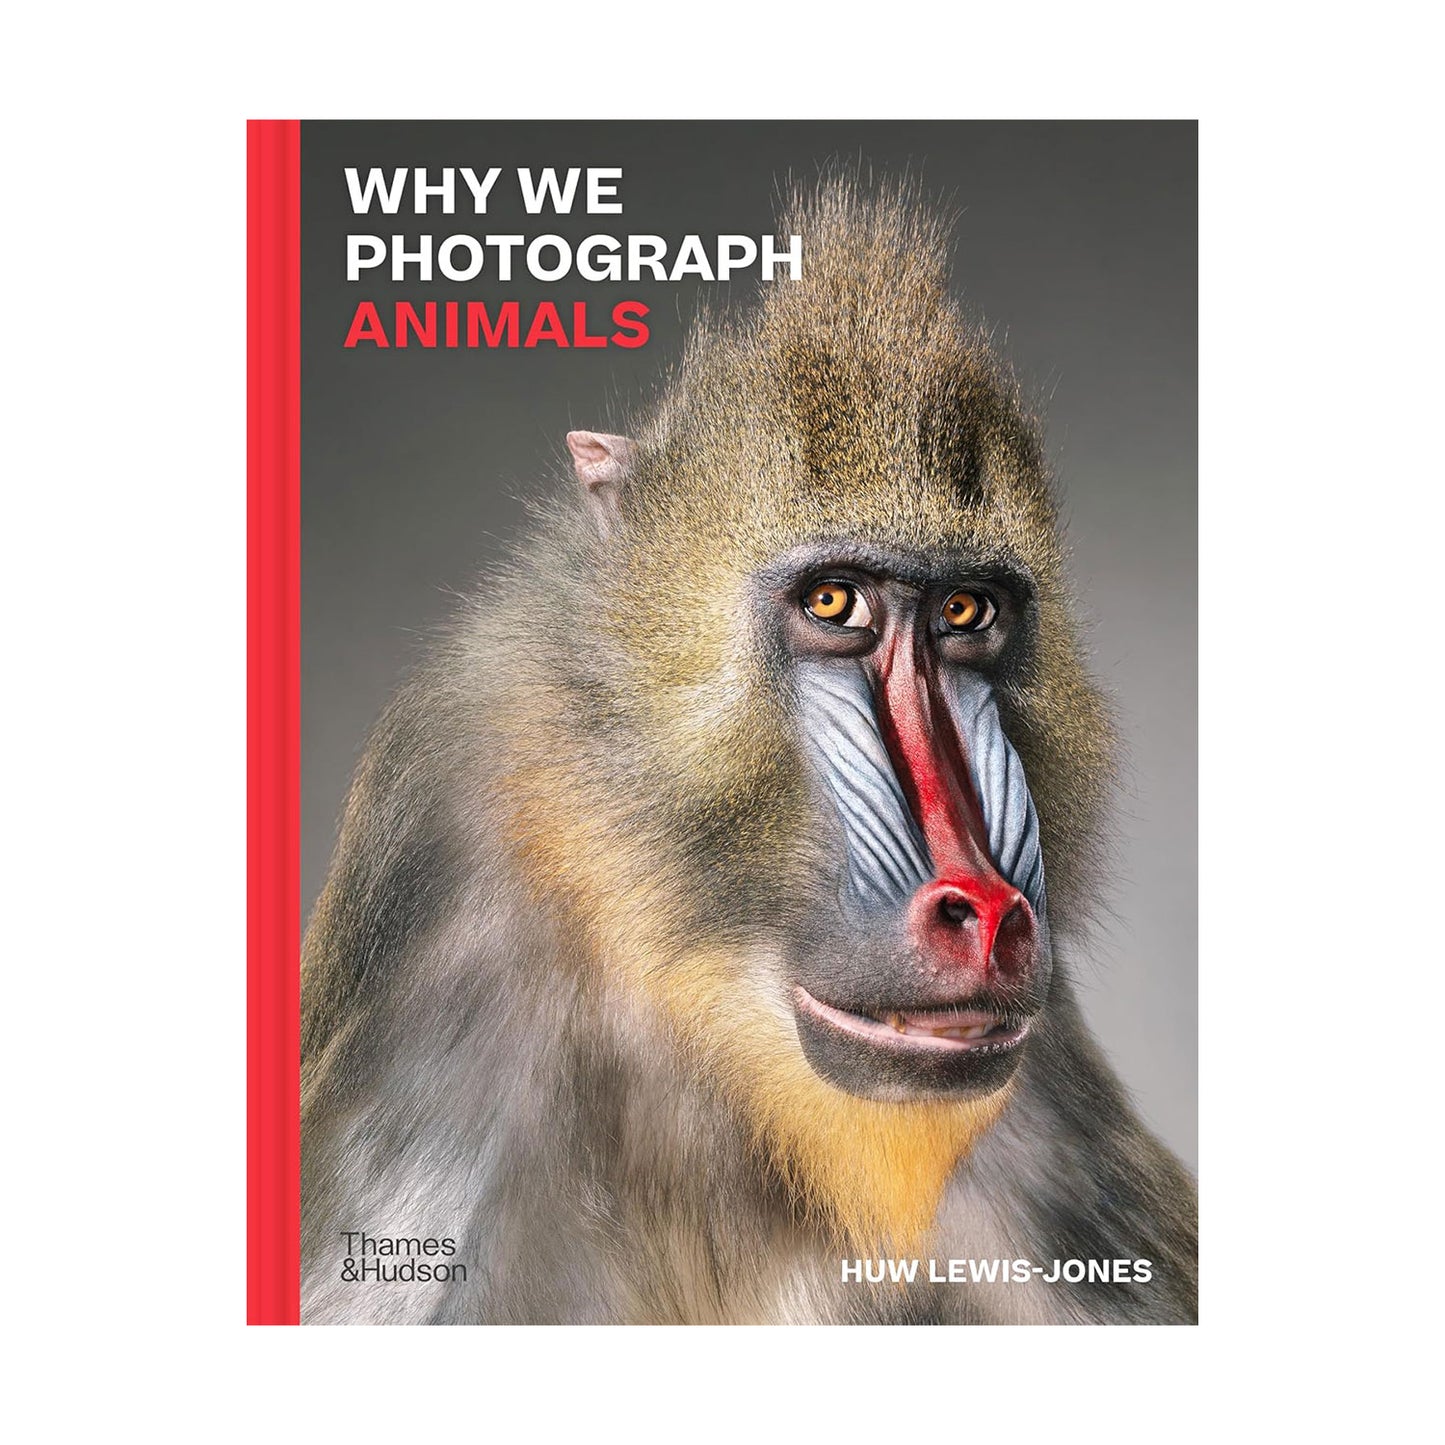 Why we photograph animals